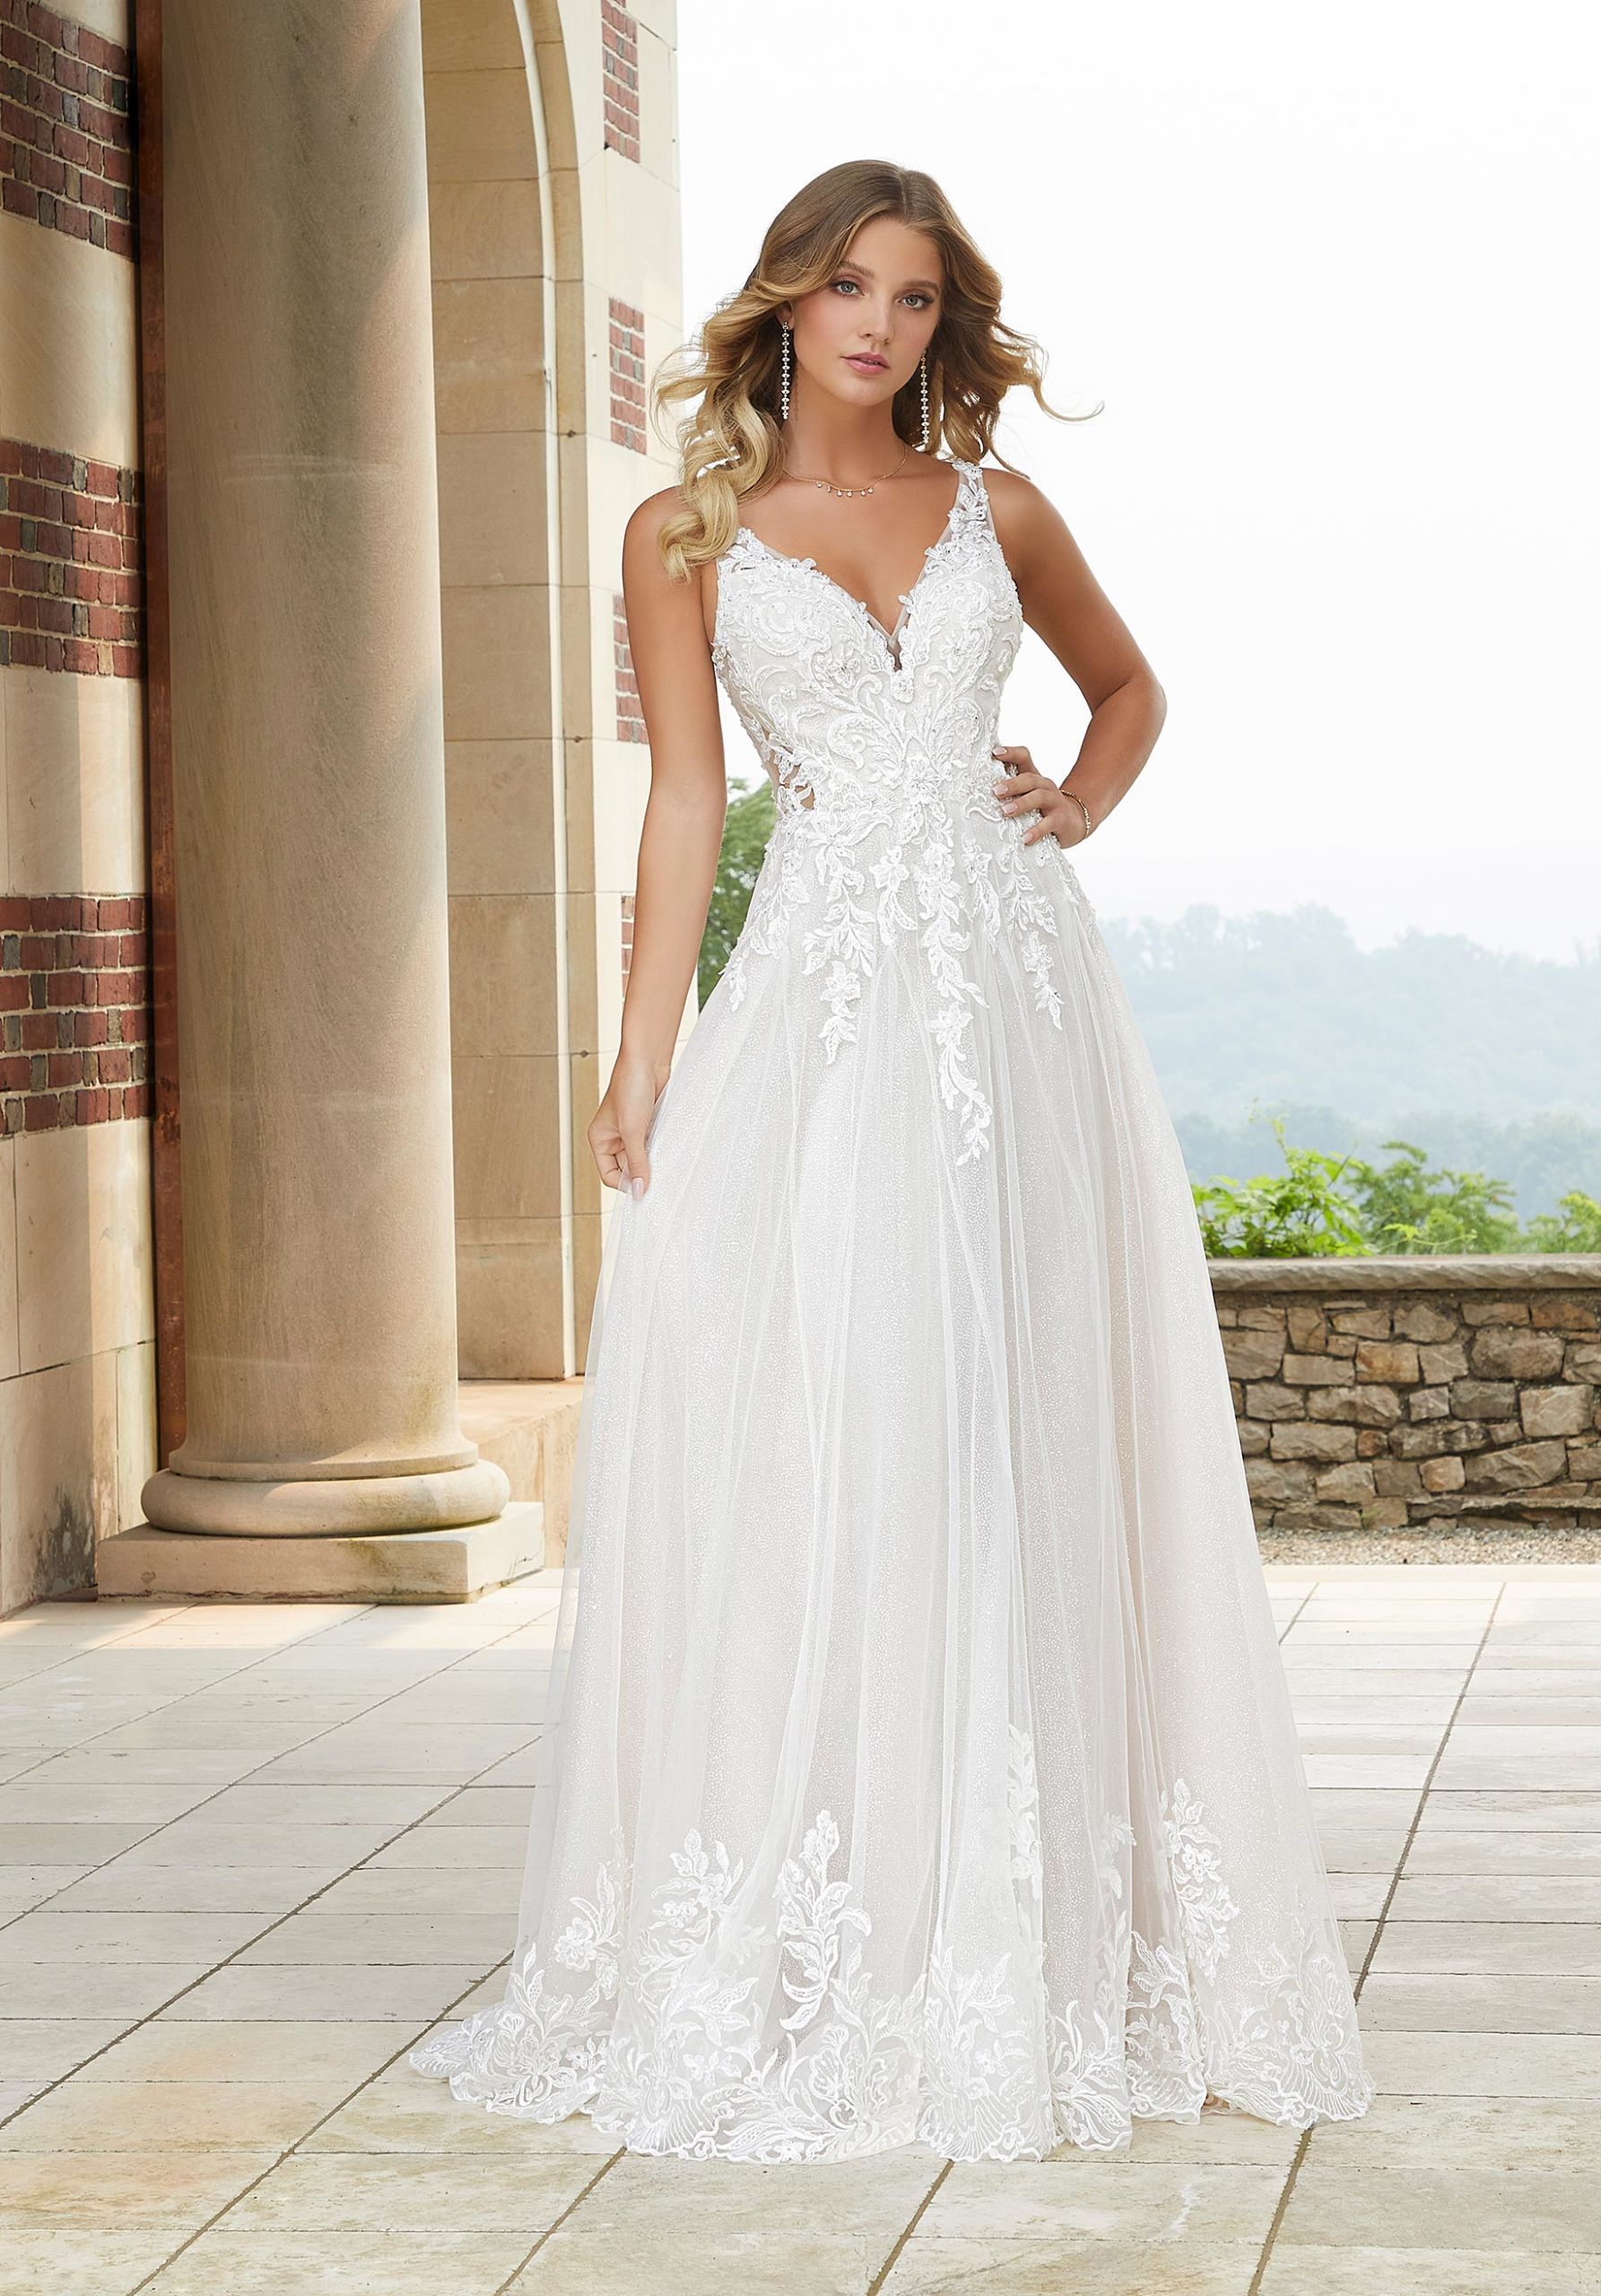 Amazing Find! 10 Beautiful Plus Size Wedding Gowns Under $400